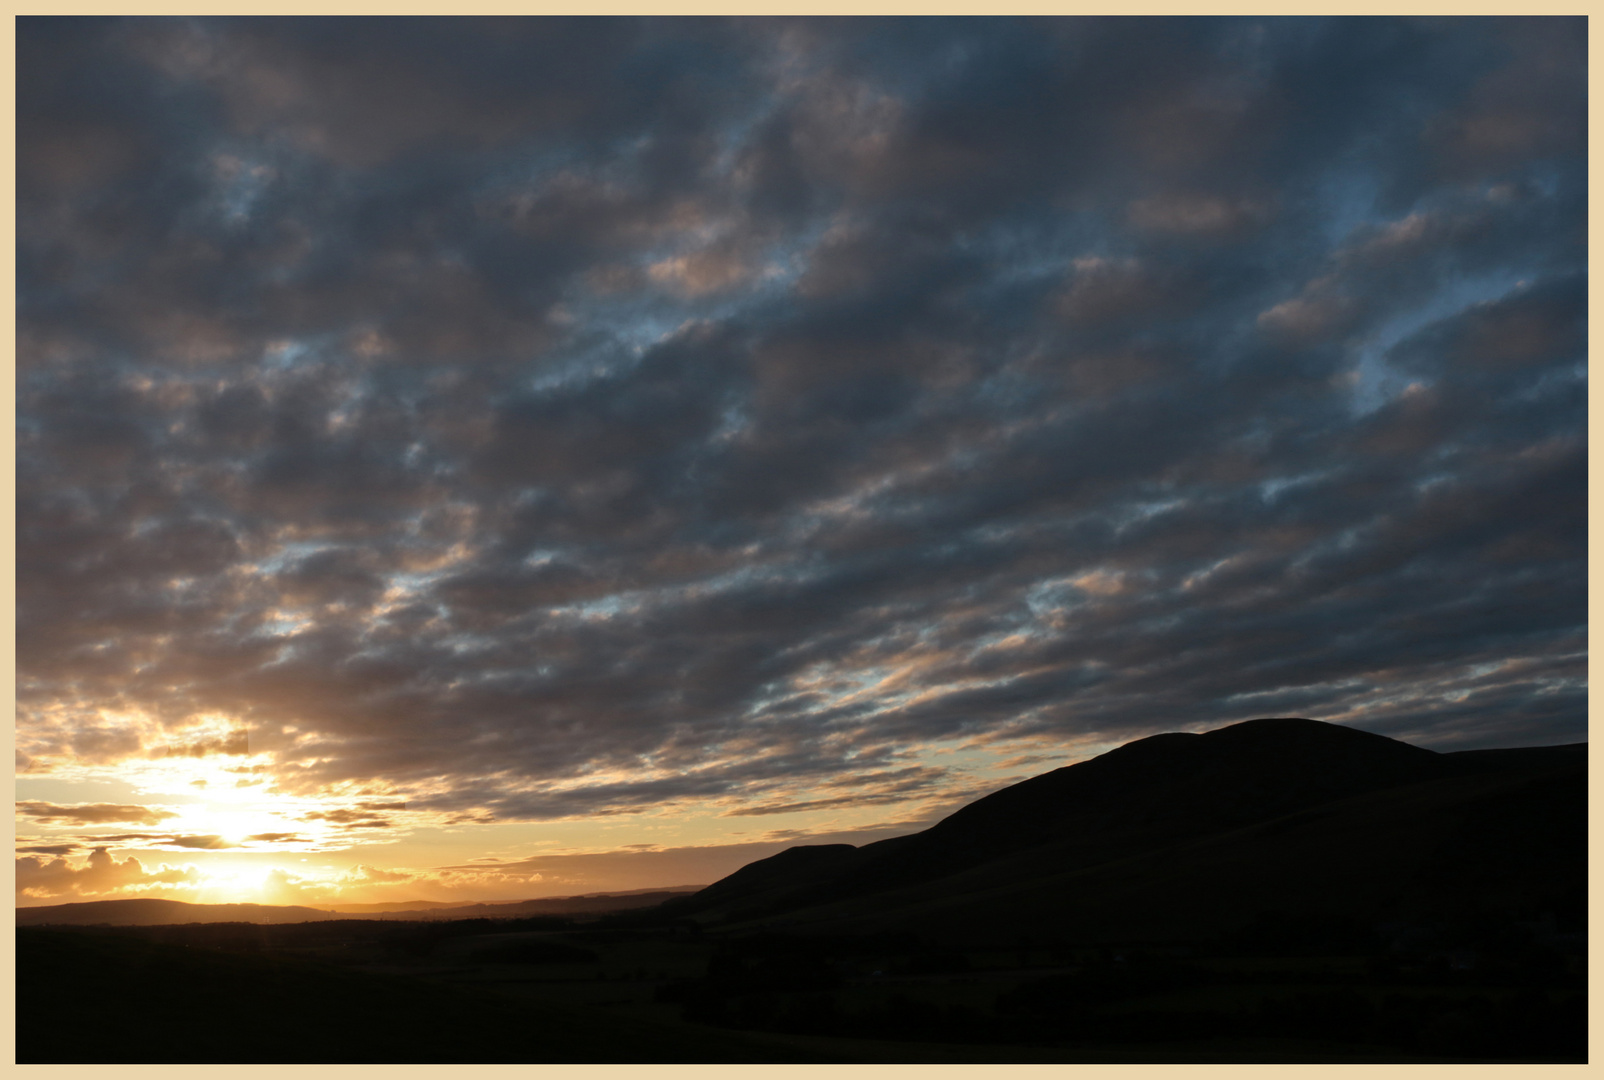 dawn over yeavering bell 8